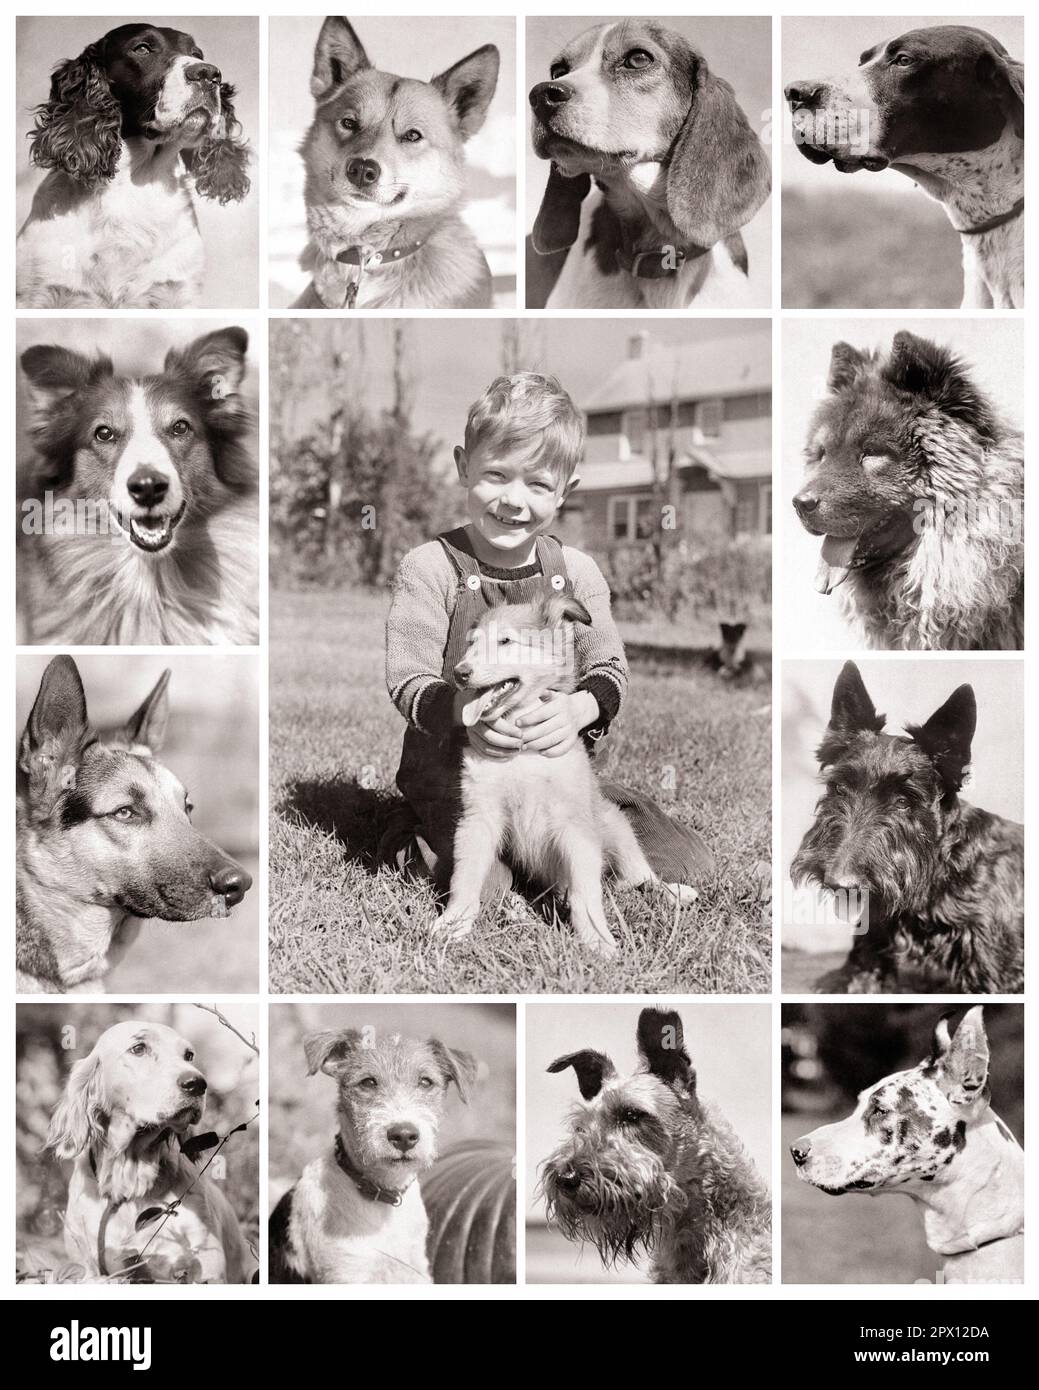 1930s MONTAGE OF POPULAR DOG BREED WITH BOY LOOKING AT CAMERA AND HIS BEST FRIEND IN CENTER  - m3375 HAR001 HARS TERRIER MAMMALS BEAGLE HIS AND CANINES HOUND POOCH RETRIEVER BREED FRIENDLY BREEDS MUTT CANINE GERMAN SHEPHERD HUNTING DOGS JUVENILES MAMMAL PUP SCOTTIE BLACK AND WHITE CAUCASIAN ETHNICITY GREAT DANE HAR001 OLD FASHIONED Stock Photo